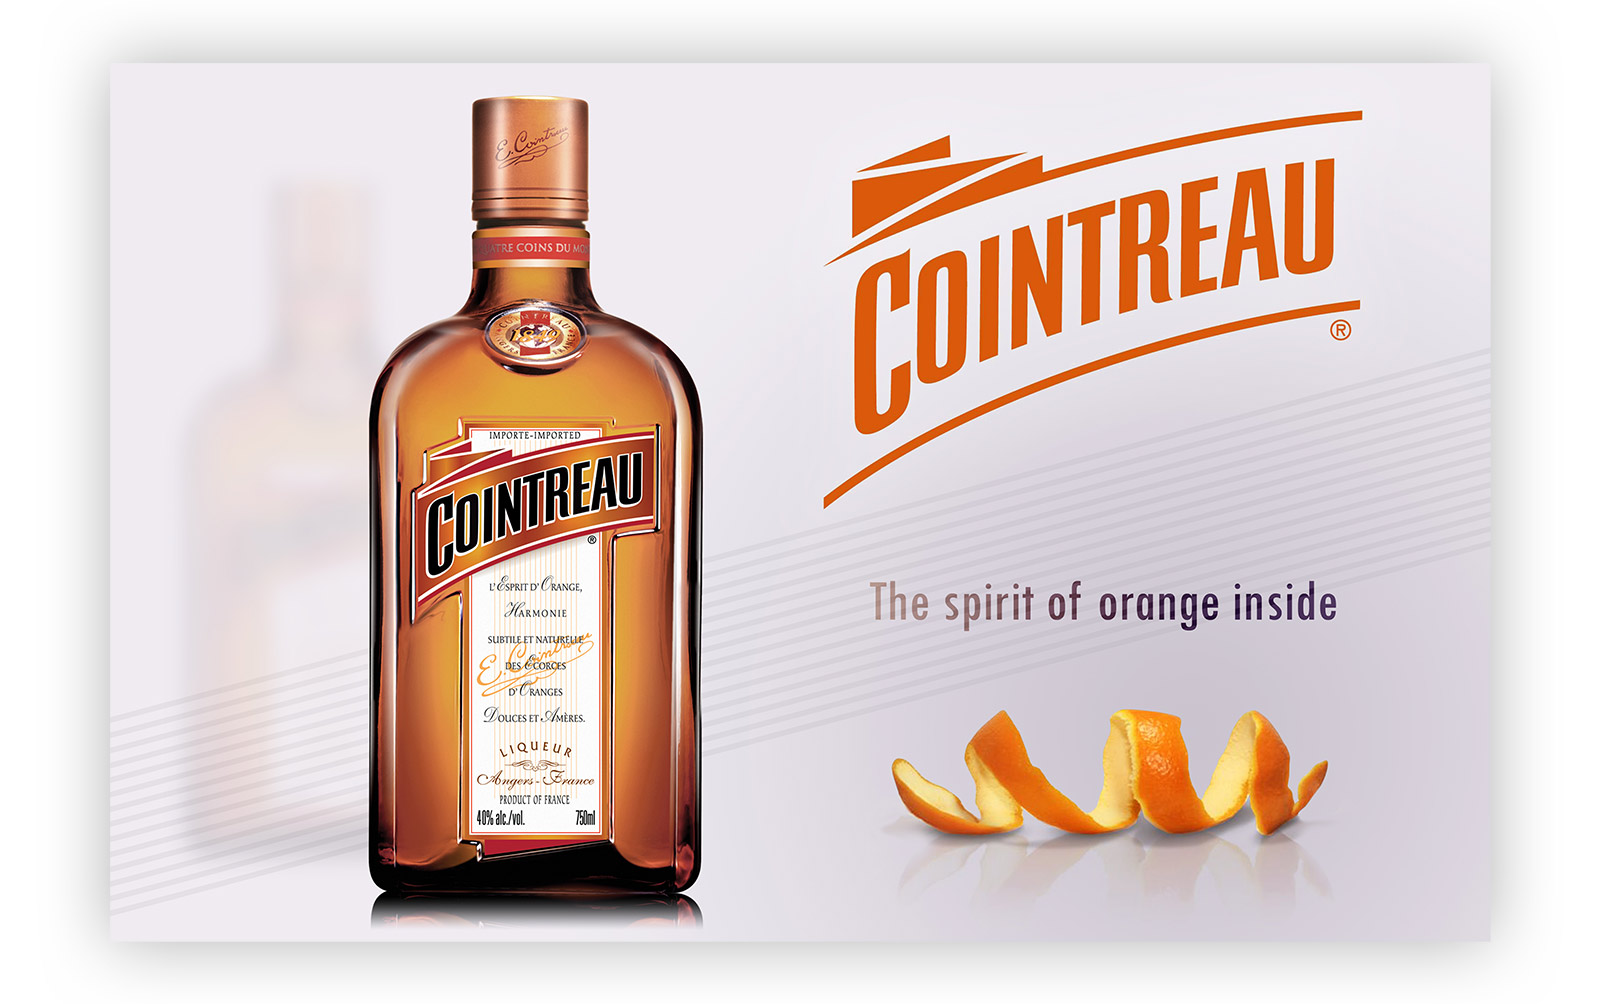 High-quality print and advertising for the spirits industry, depicting: Cointreau.